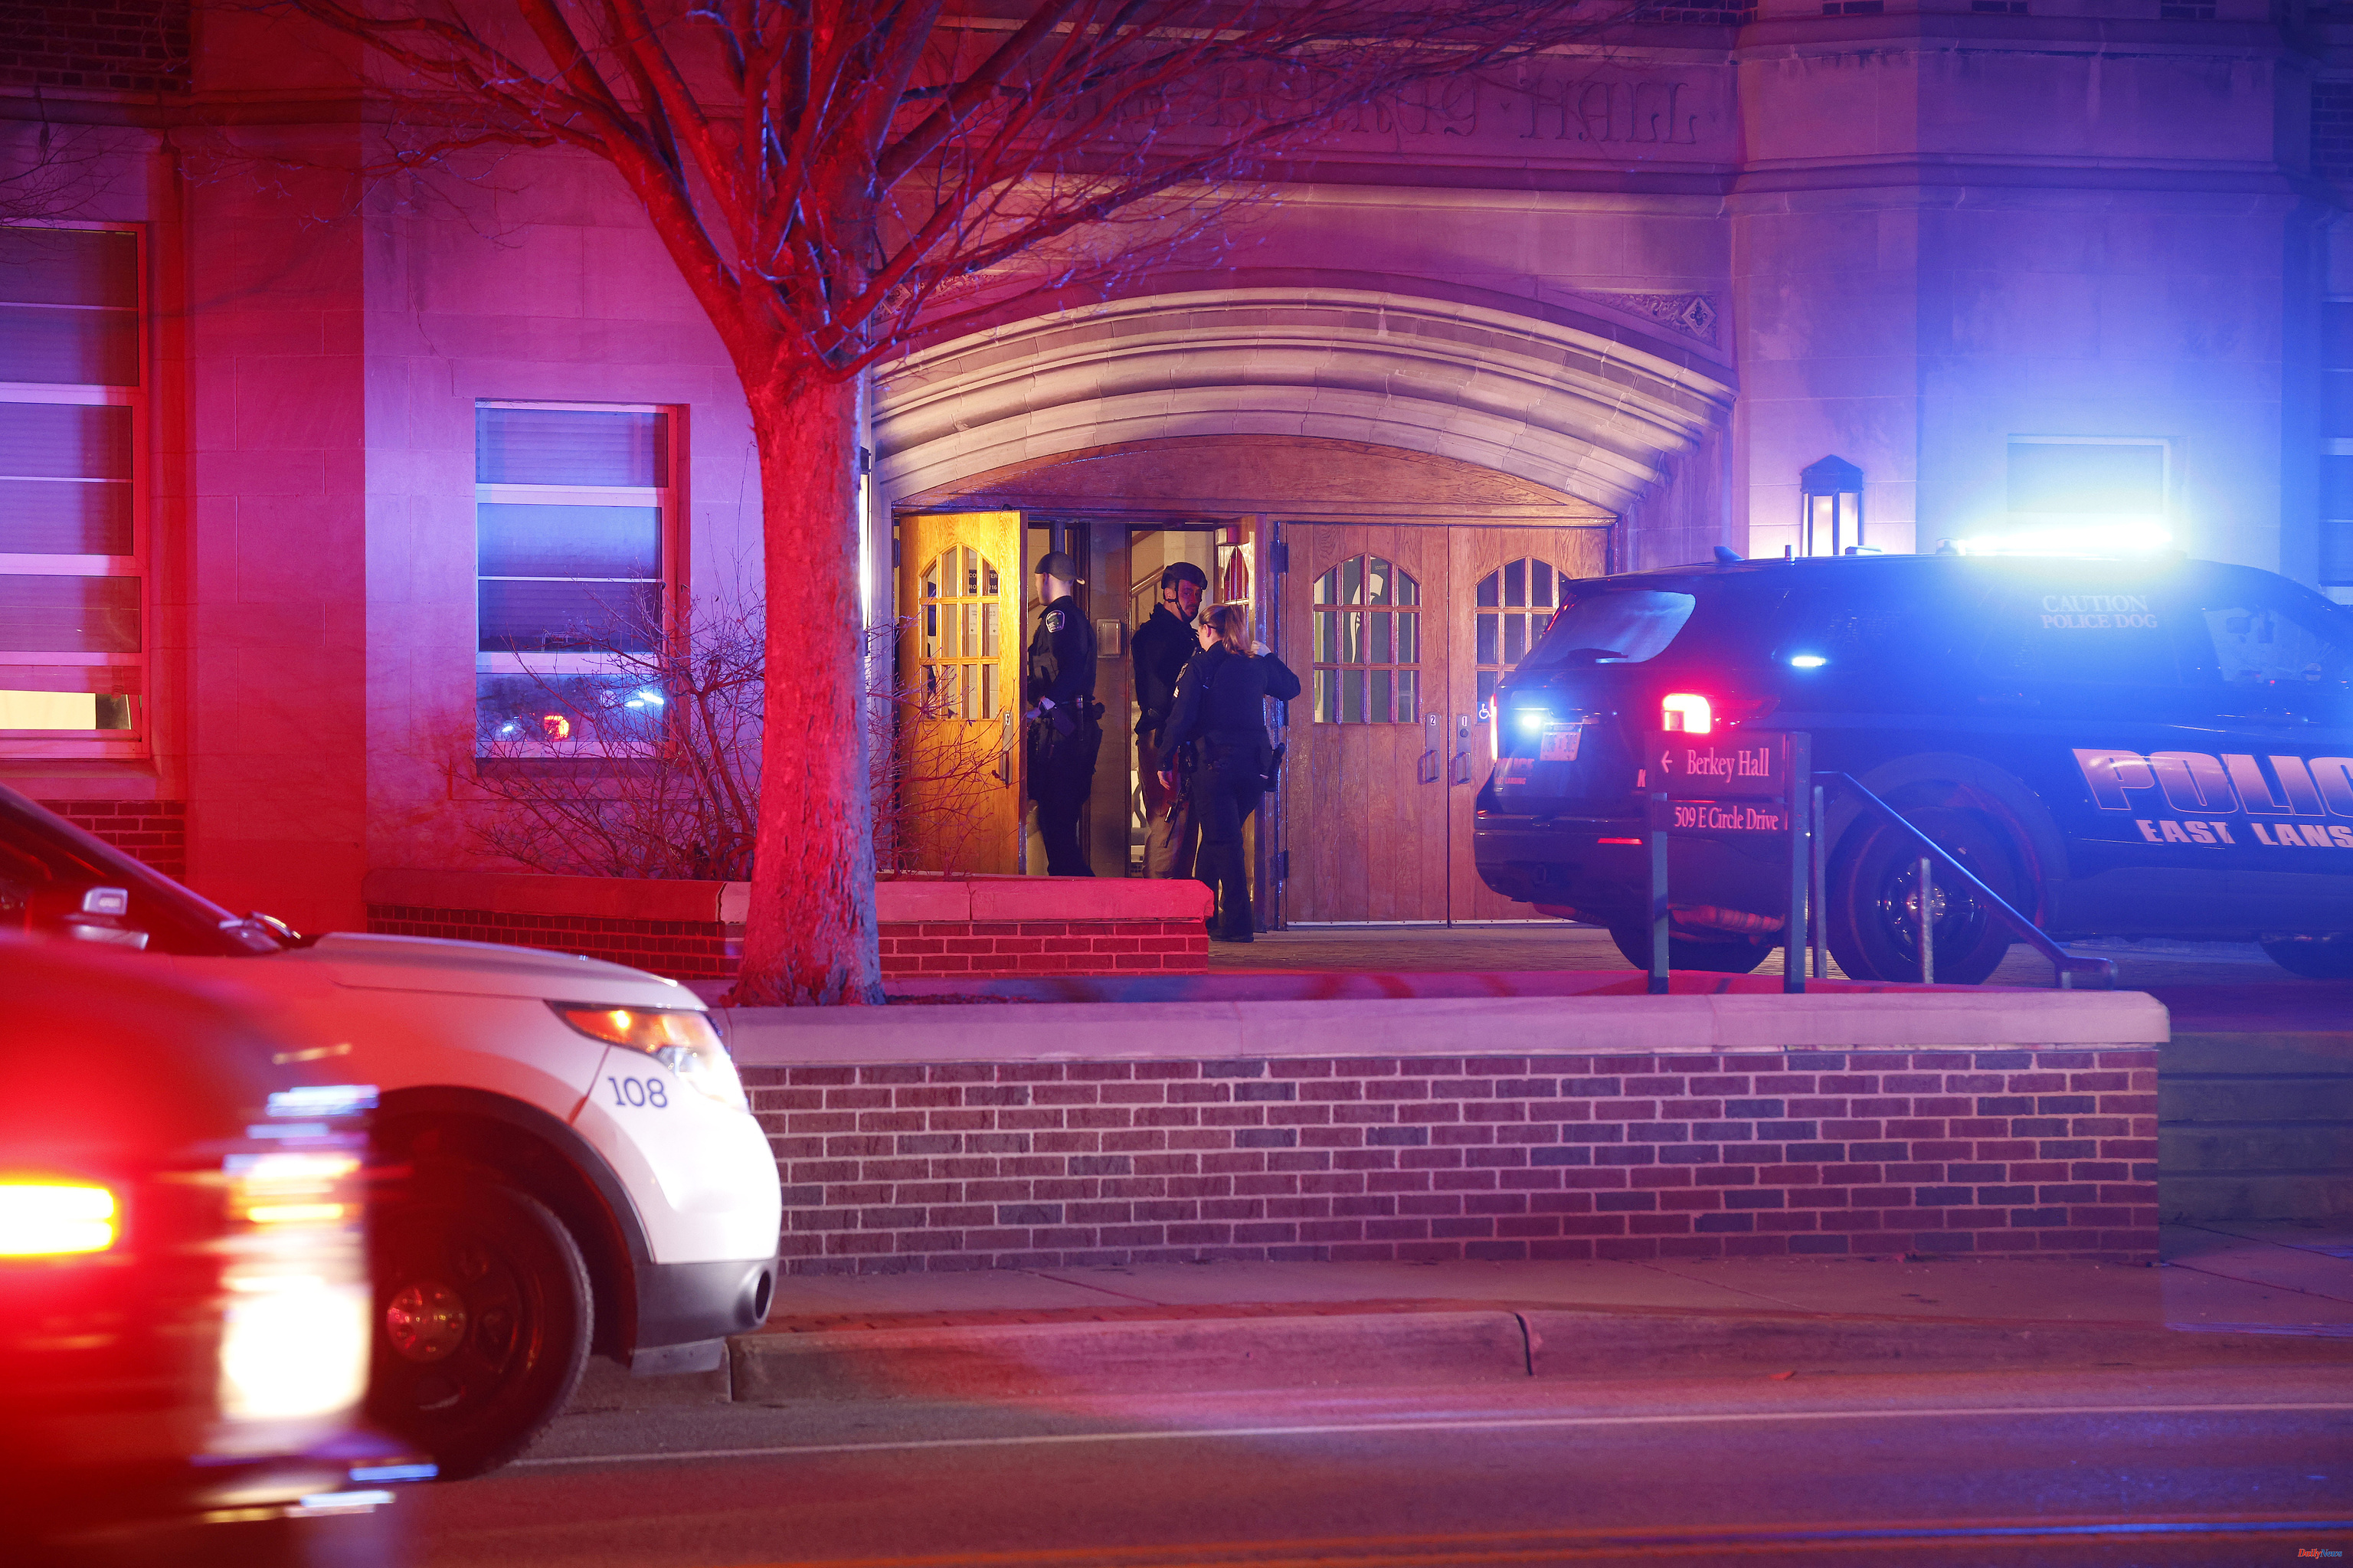 USA A shooting at a Michigan university leaves three dead and five wounded